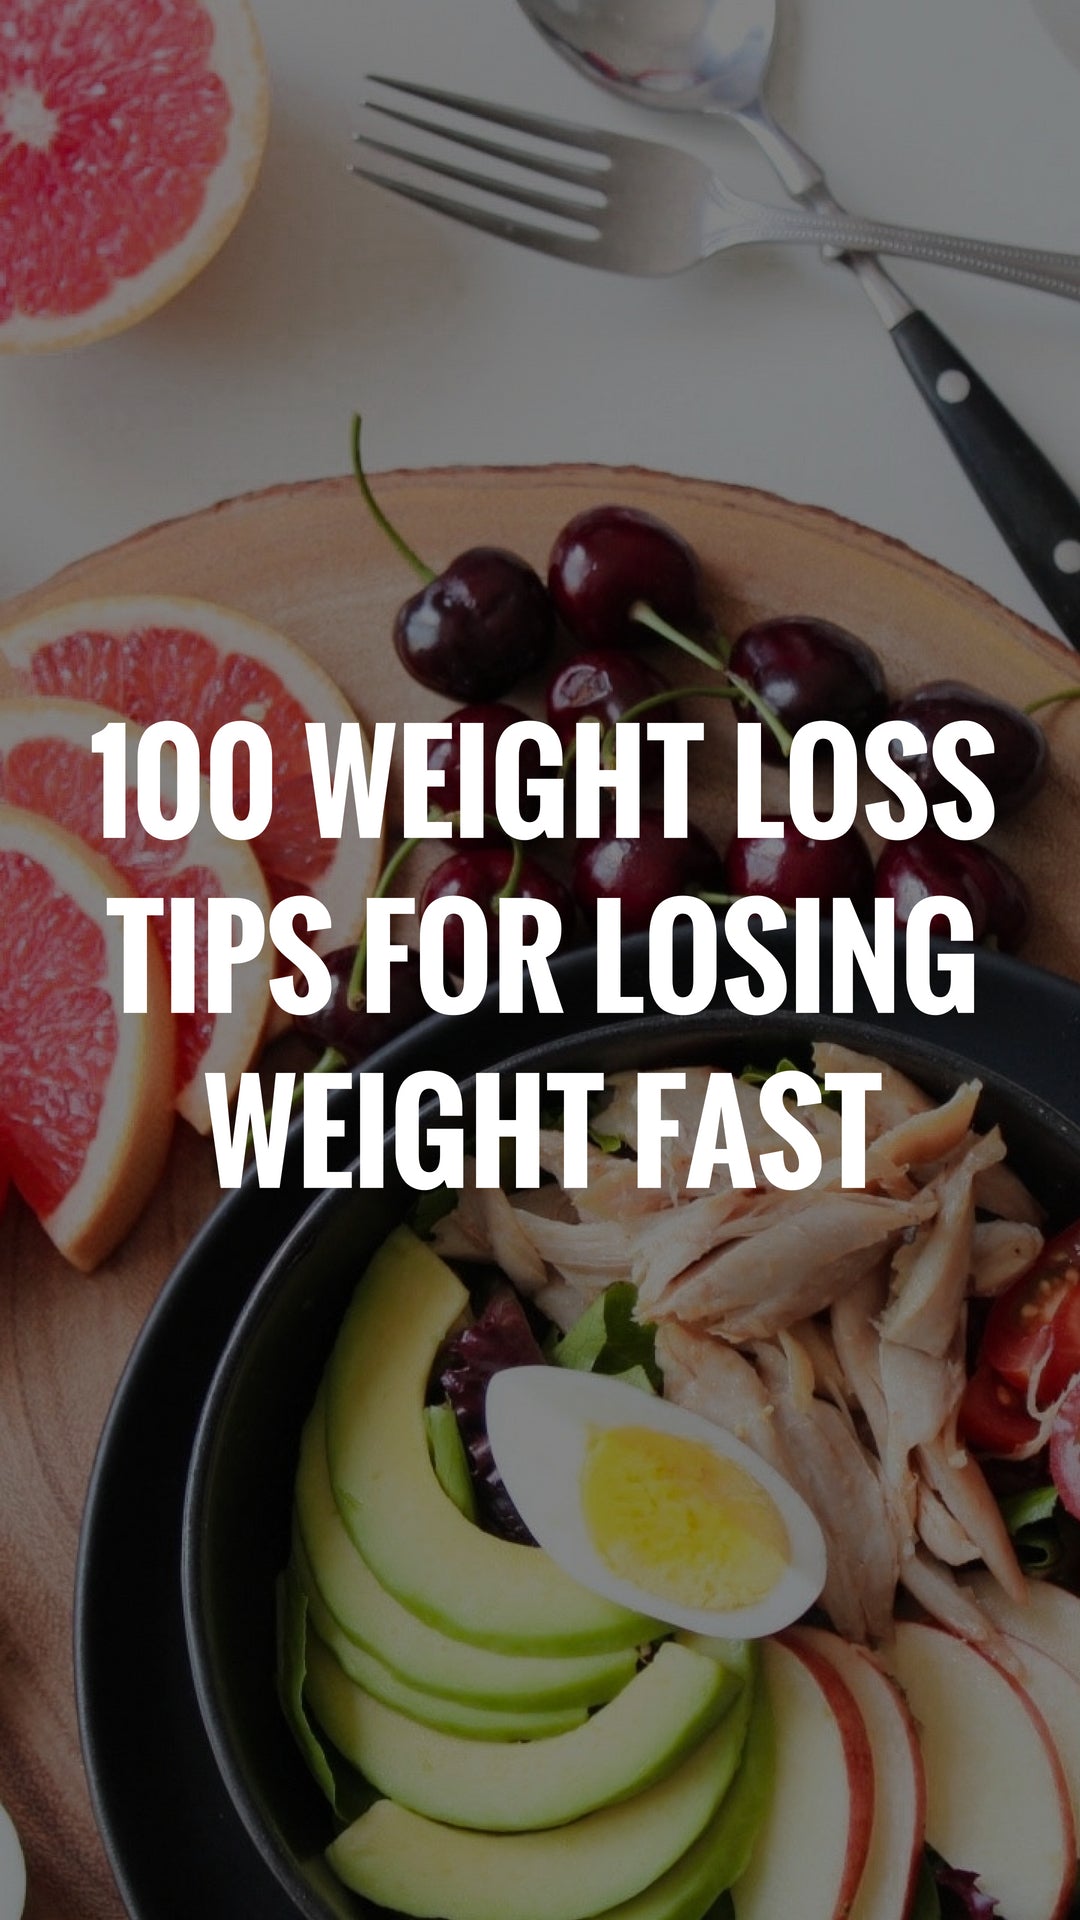 quick weight loss tips